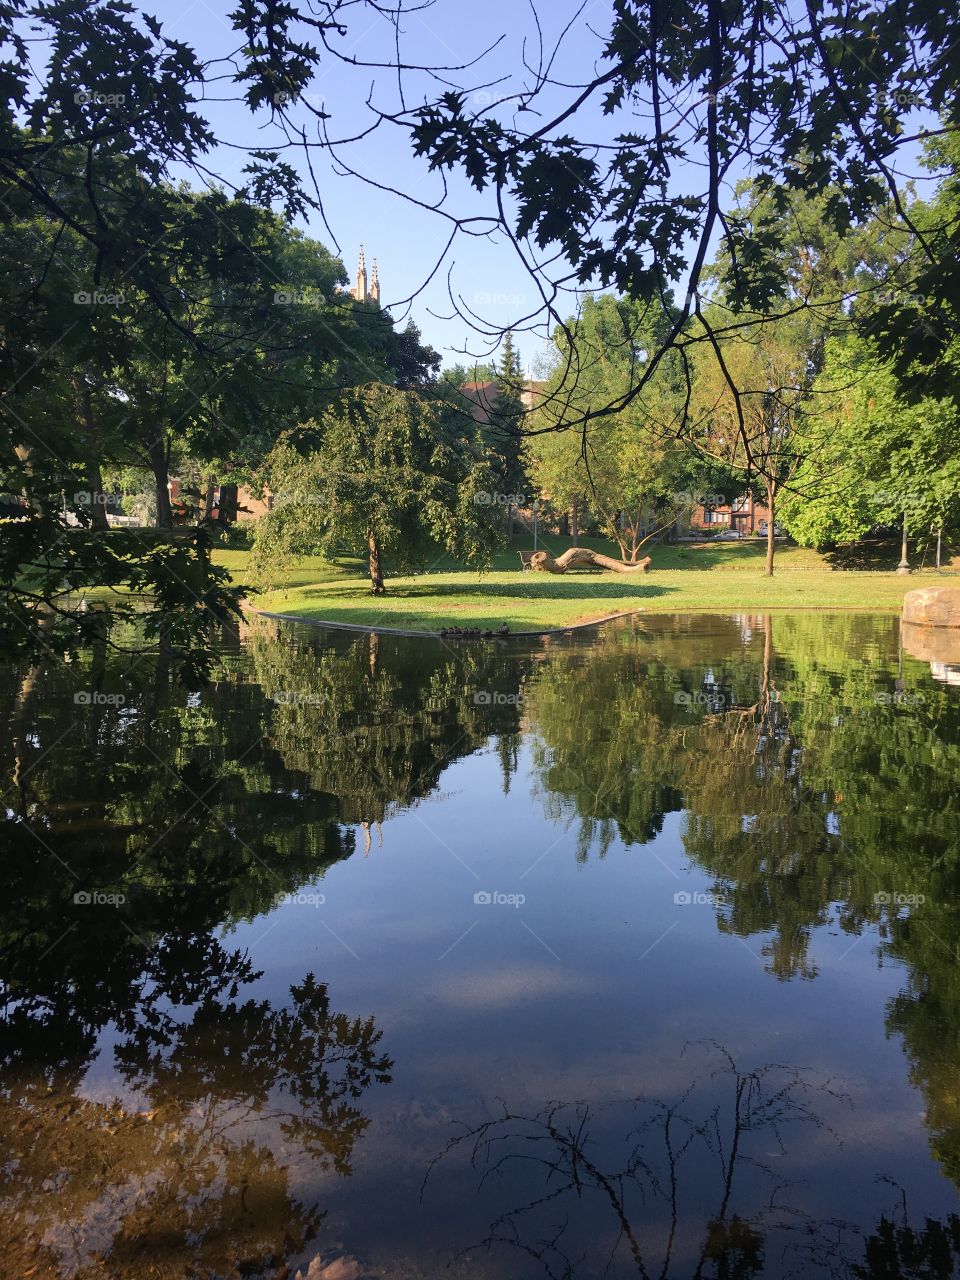 Beautiful calm morning in a city park during summertime 